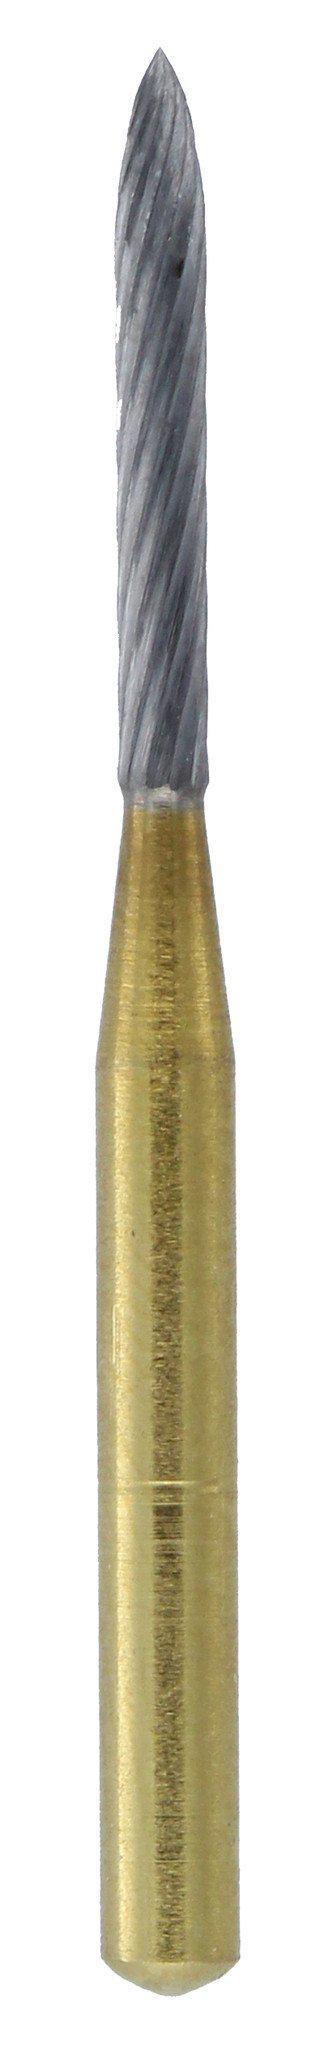 12 Flute H48L010  Dentalree Premium T&F Carbide Burs - Midwest Type Made in Canada